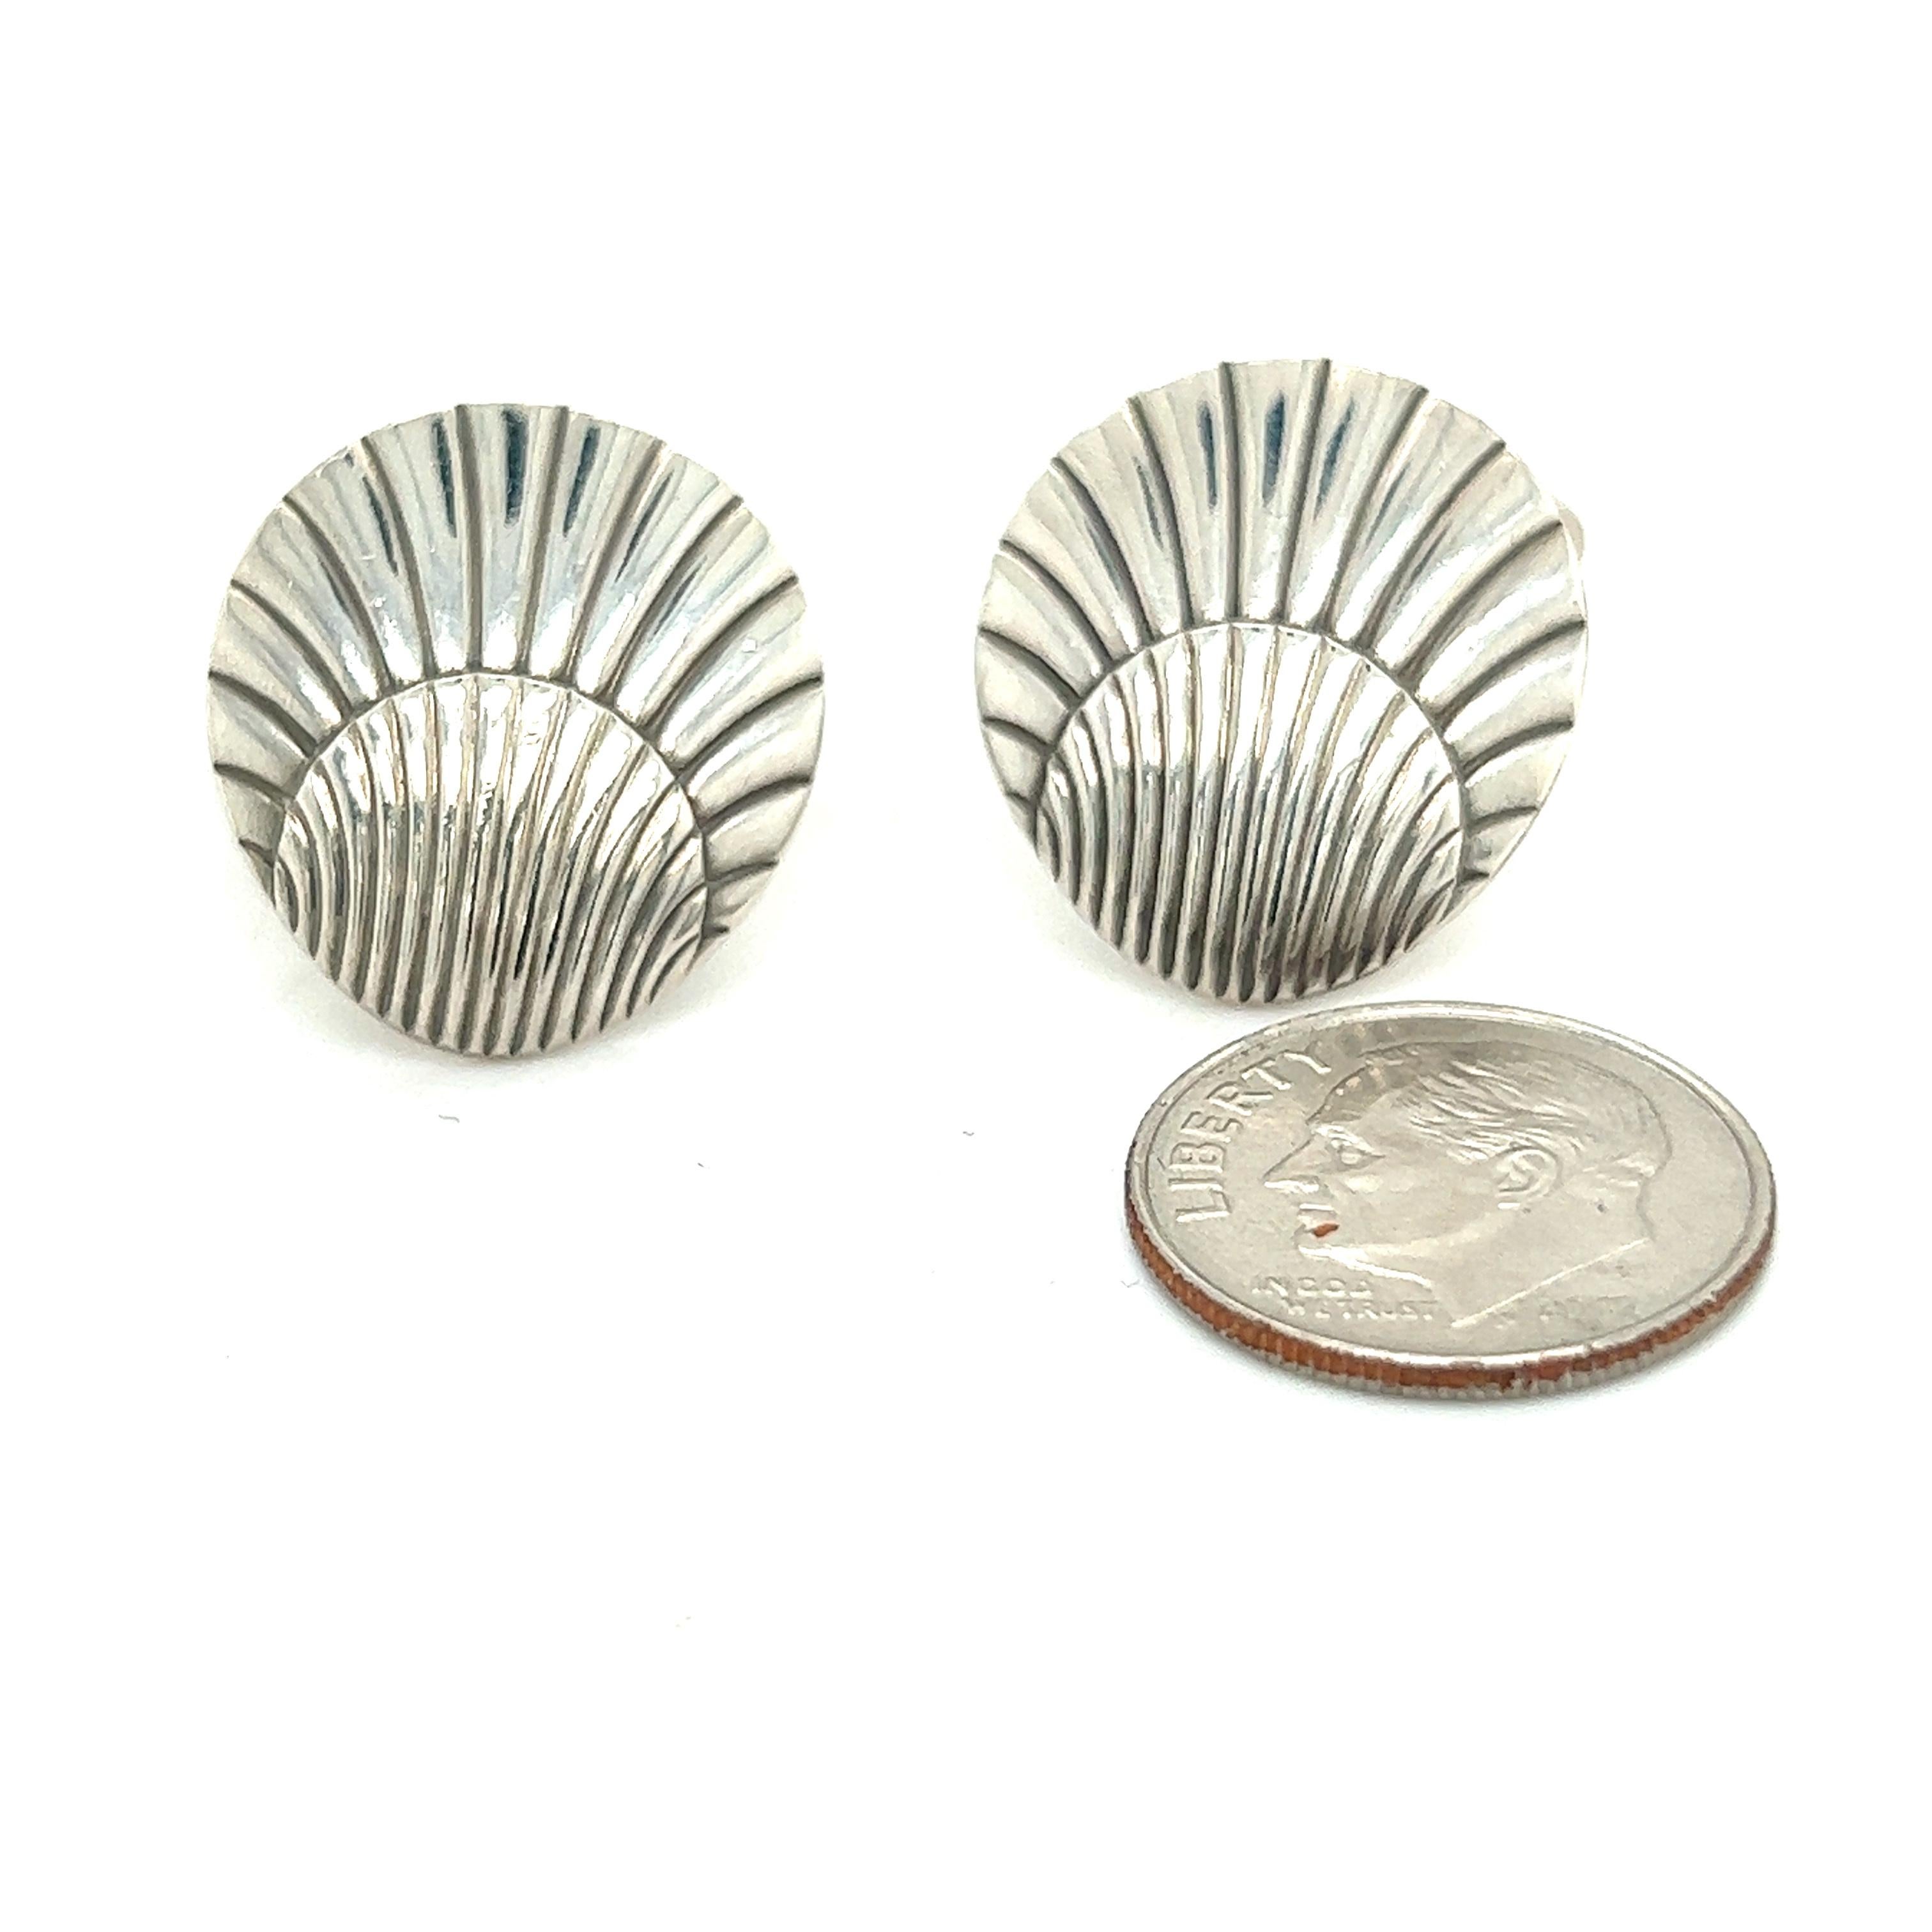 Authentic Georg Jensen Estate Seashell Cufflinks Silver GJ14

These elegant Authentic Georg Jensen Men's Seashell Cufflinks are made of sterling silver and have a weight of 13.25 grams.

TRUSTED SELLER SINCE 2002

PLEASE SEE OUR HUNDREDS OF POSITIVE